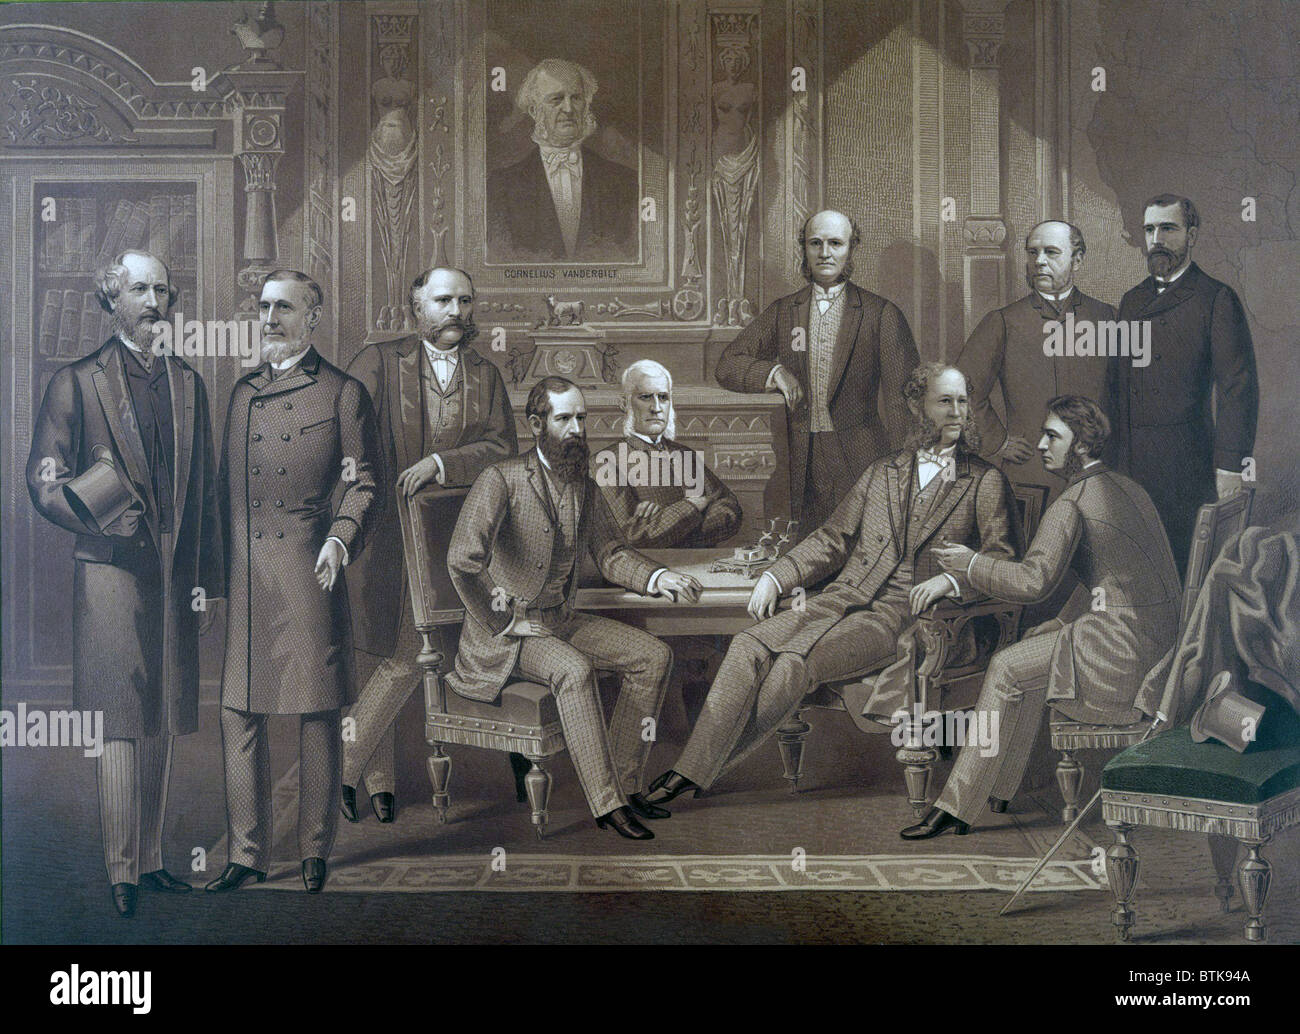 Kings of Wall Street, 1882. Left to right: Cyrus Field, Russell Sage, Rufus Hatch, Jay Gould, Sidney Dillon, Darius Ogden Mills, William H. Vanderbilt, August Belmont, George Ballou, James R. Keene Stock Photo